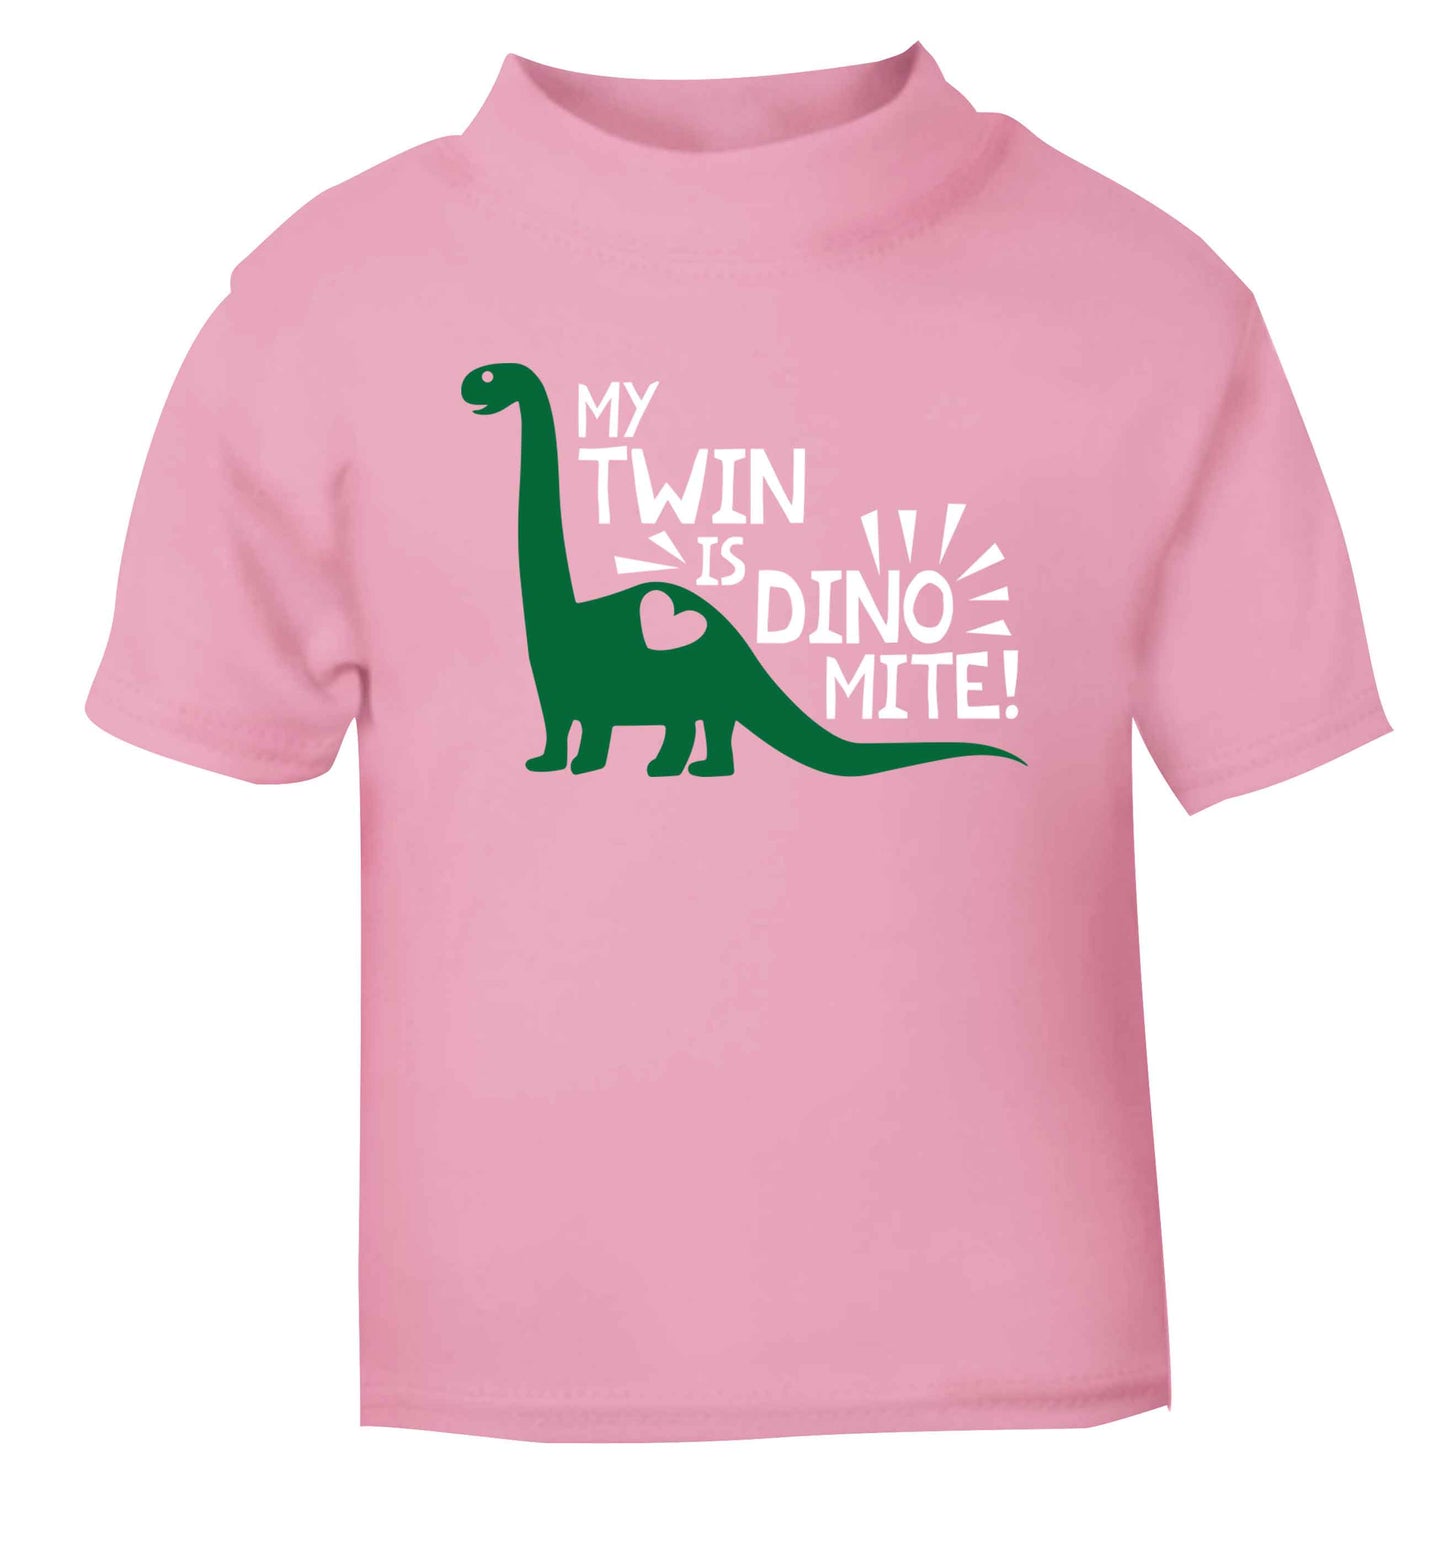 My twin is dinomite! light pink Baby Toddler Tshirt 2 Years